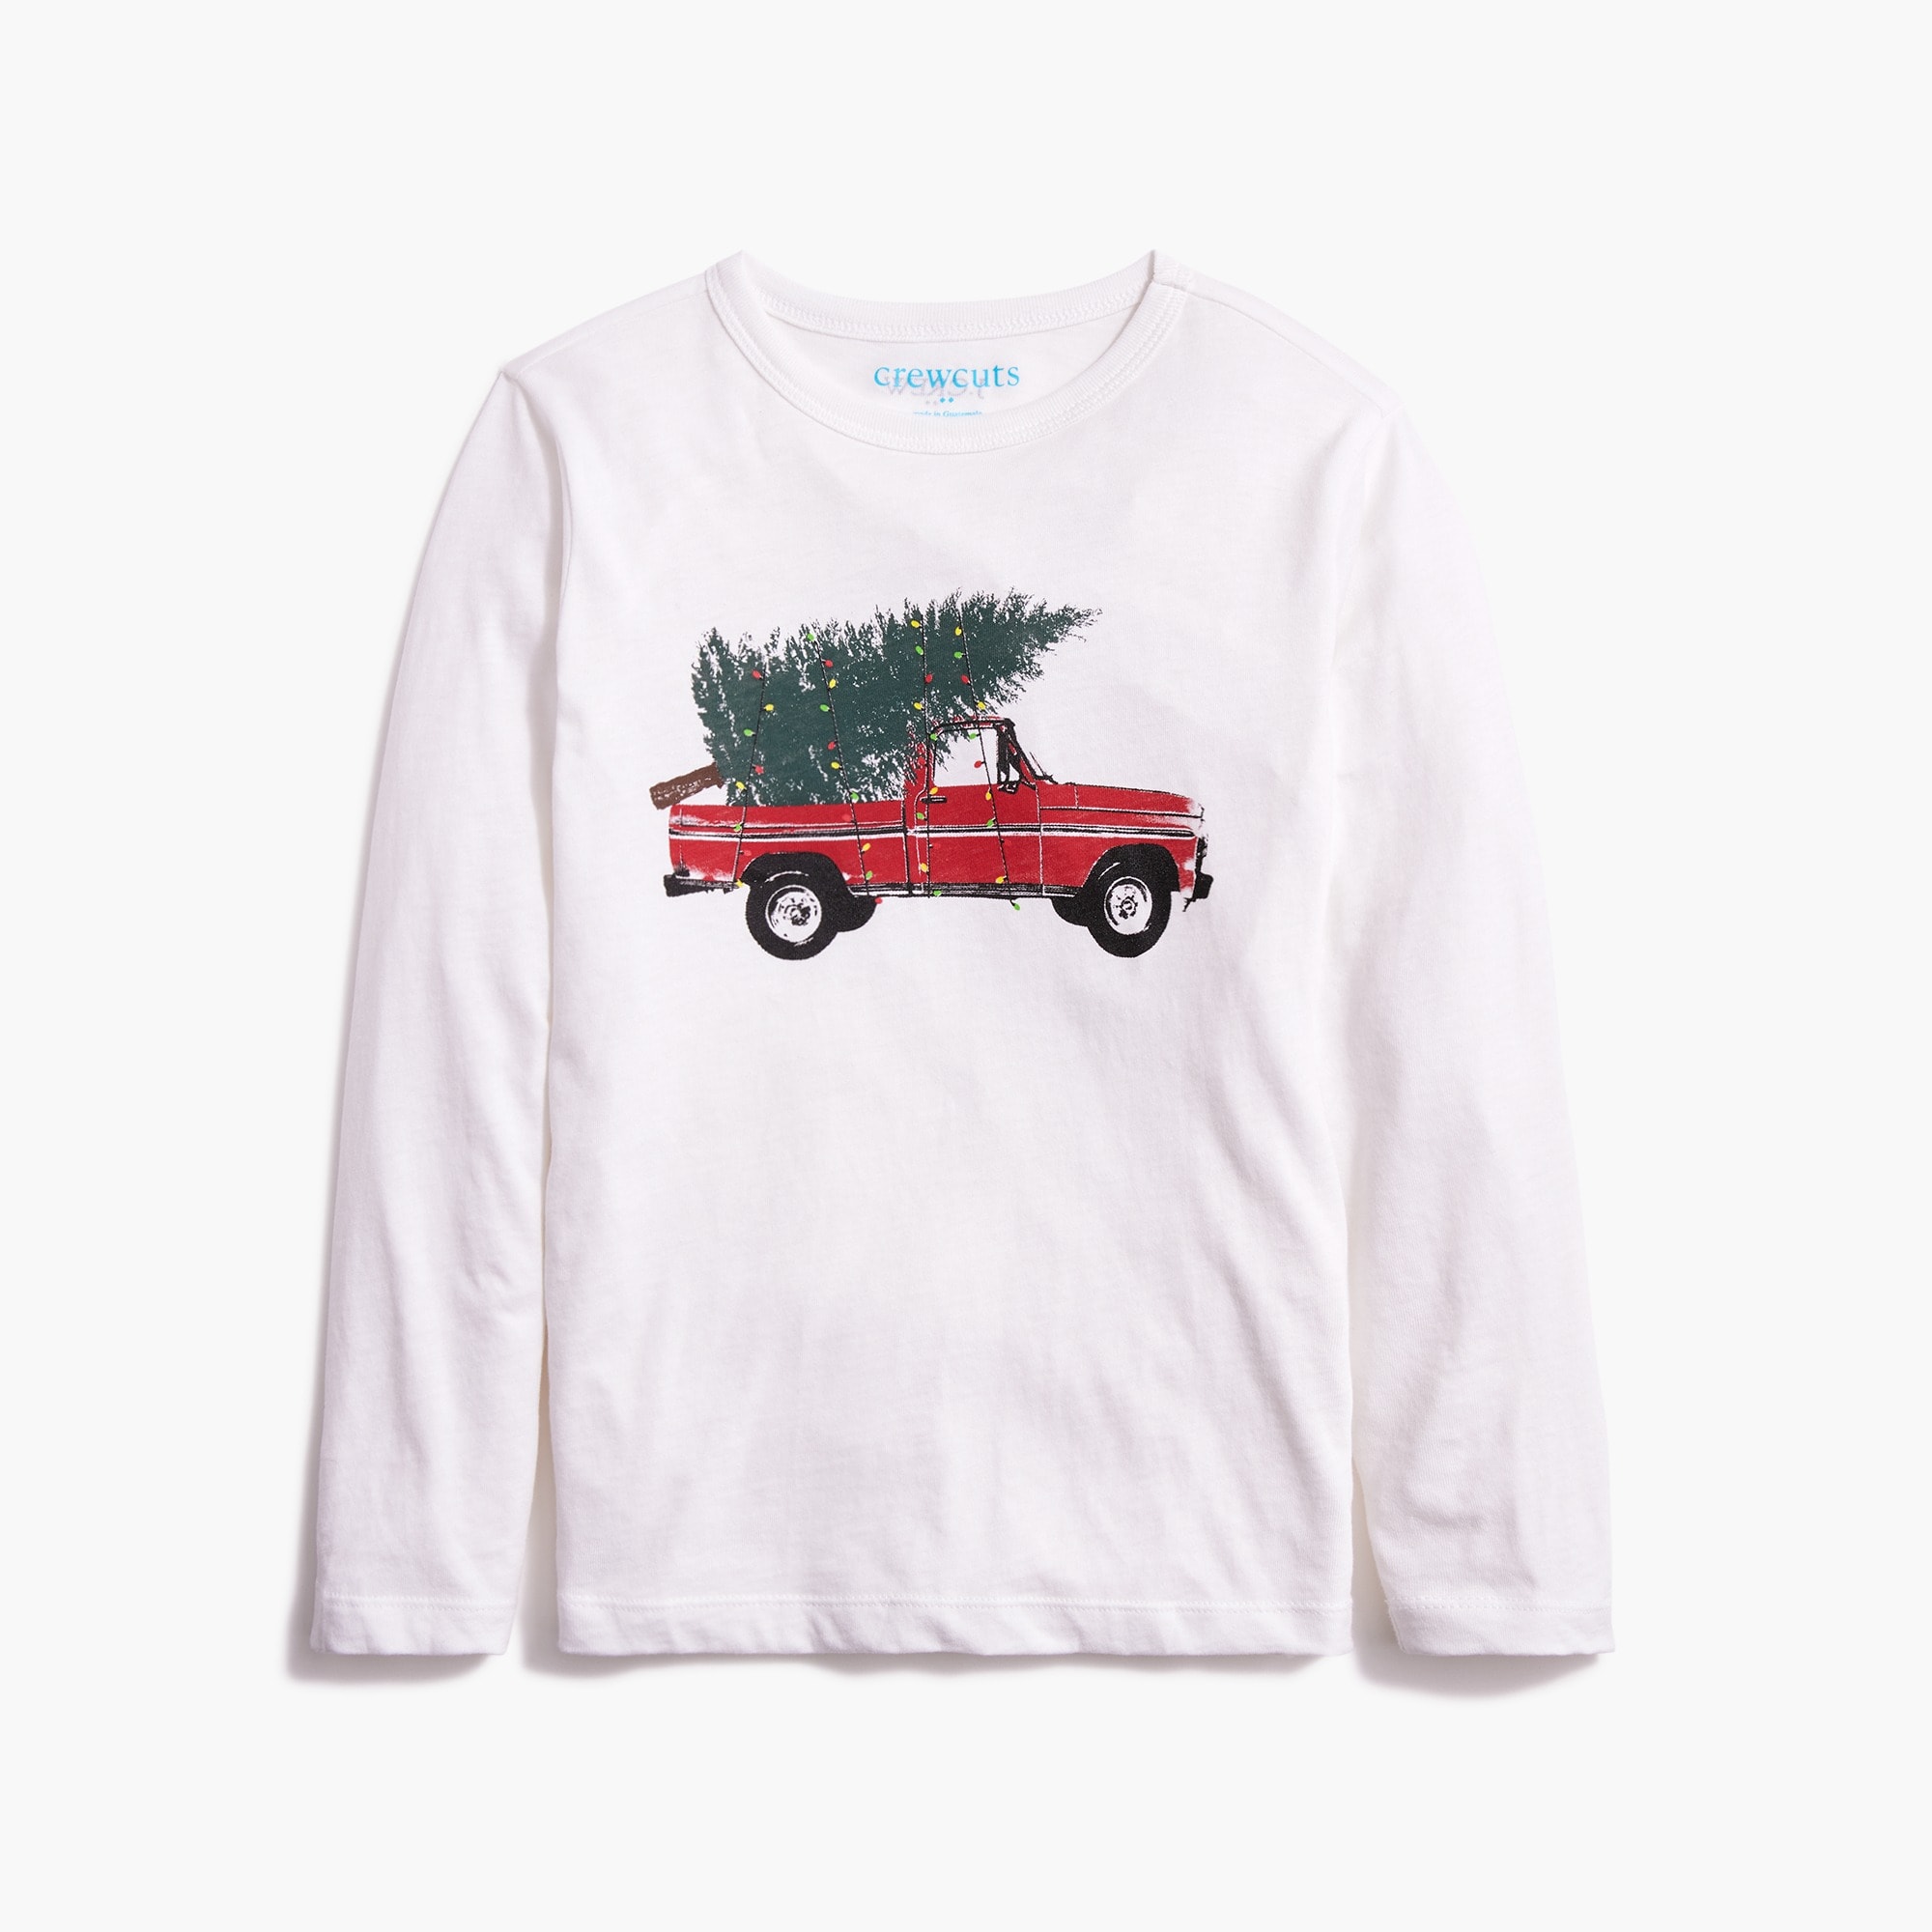 Boys' truck and tree graphic tee